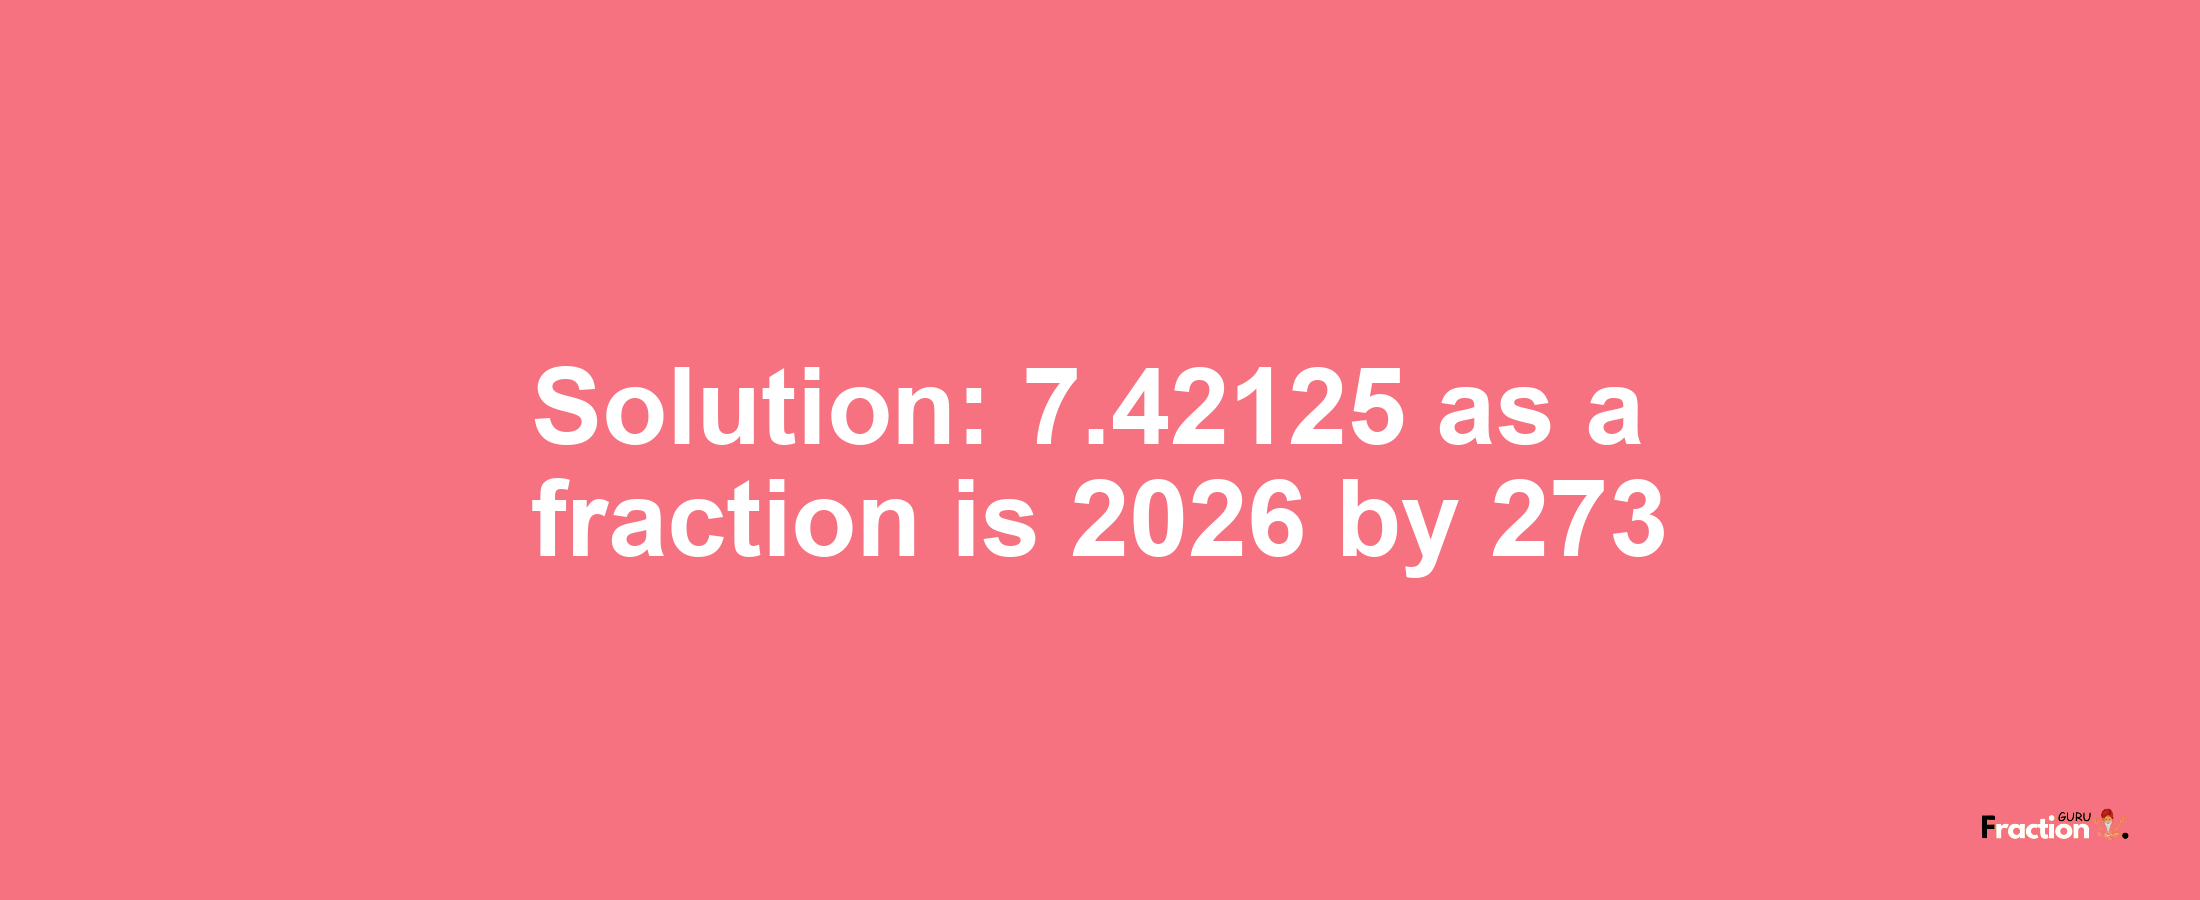 Solution:7.42125 as a fraction is 2026/273